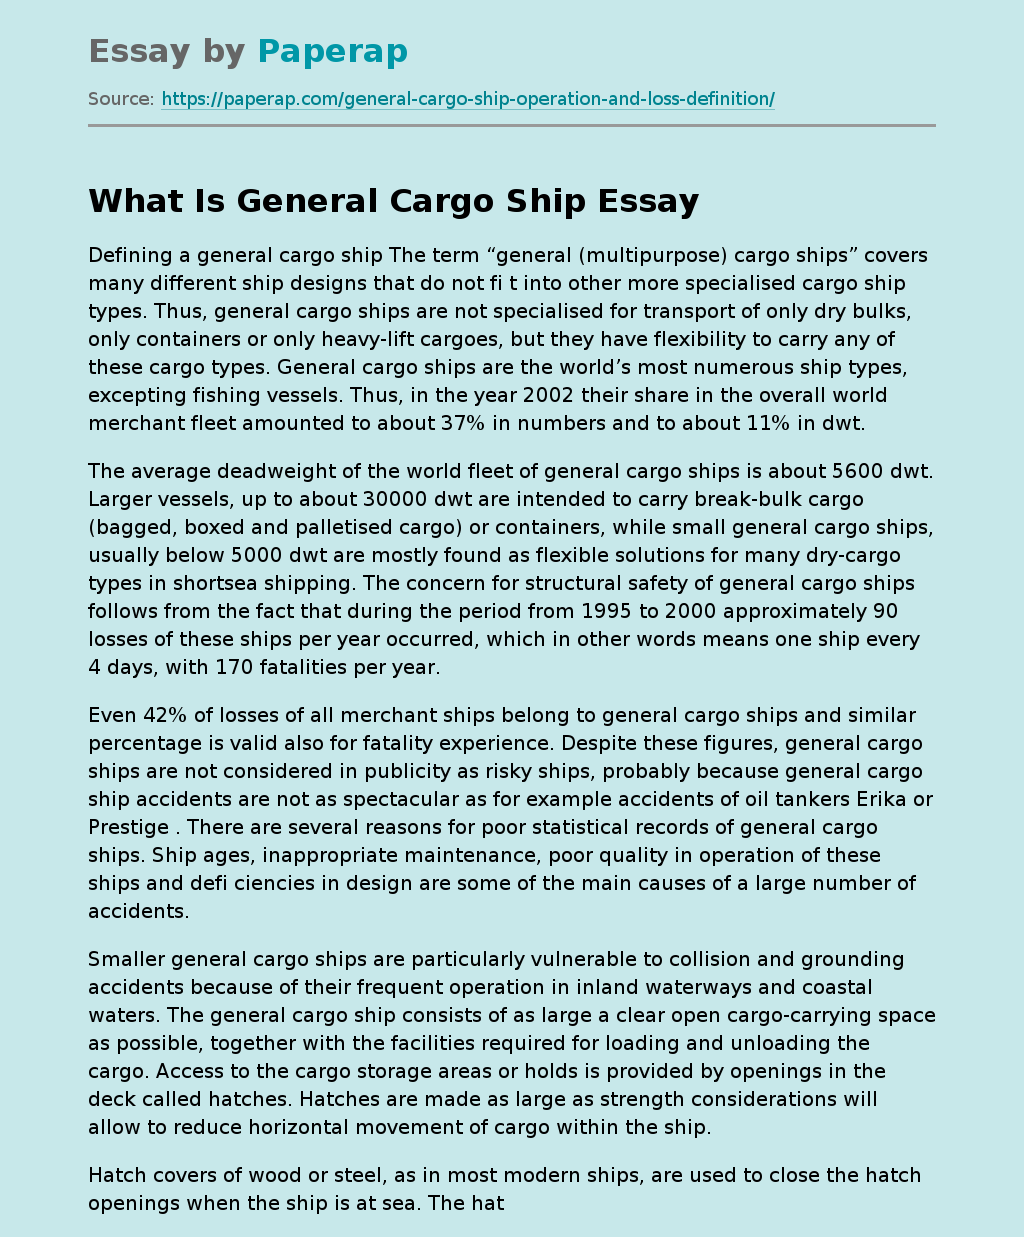 What Is General Cargo Ship